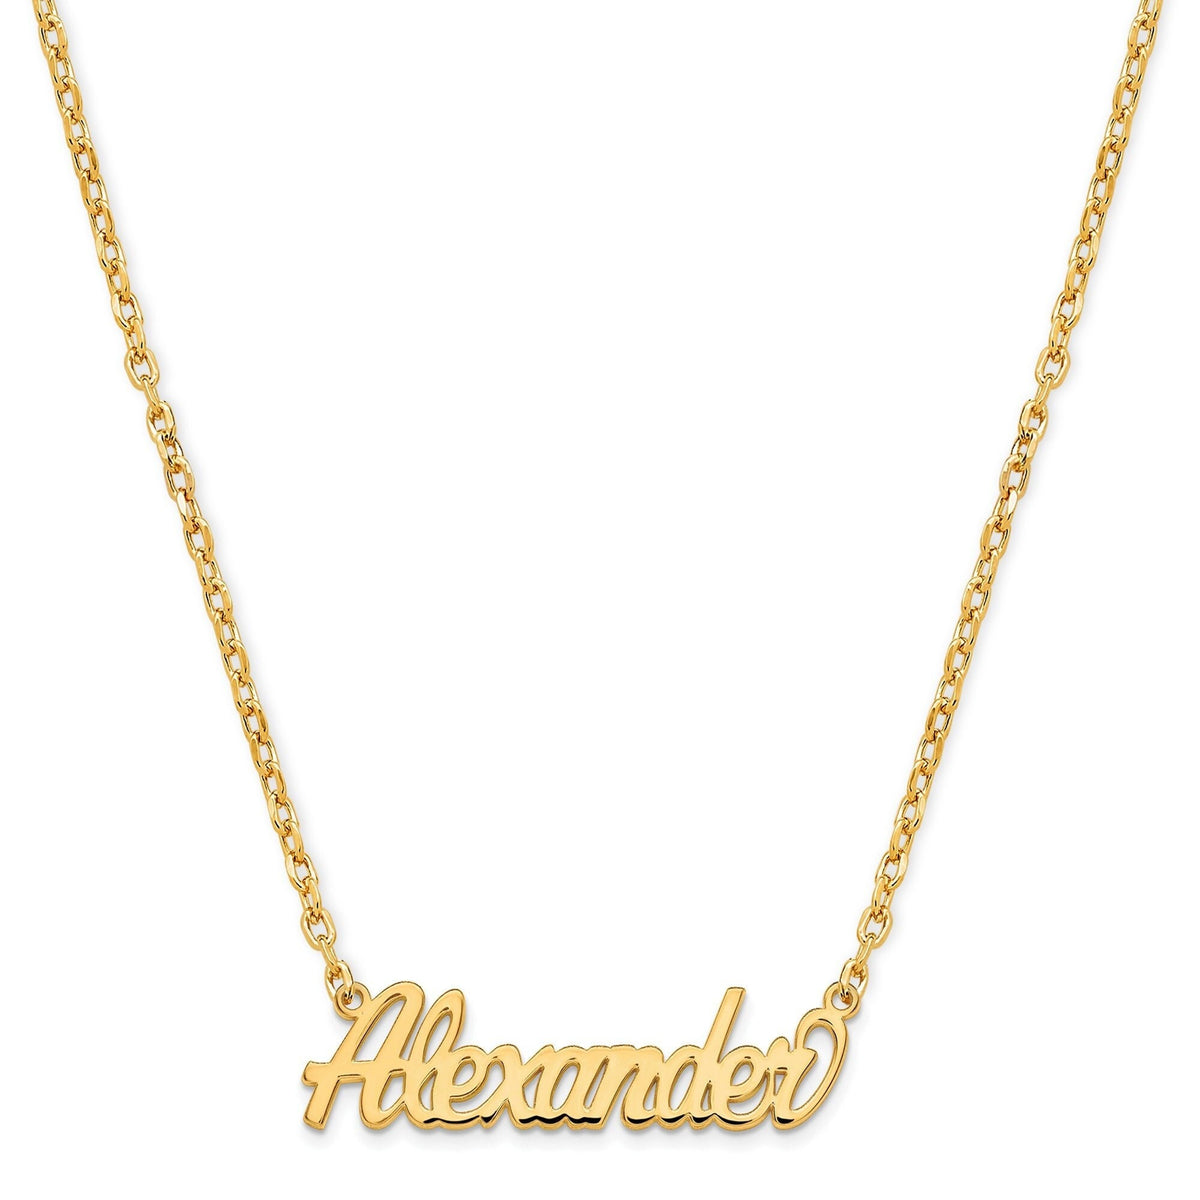 Perfect Script Name Necklace - Available in 10k Sterling Silver Rose Gold and Gold Plated Sterling Silver- Made to Order Gift Box Included